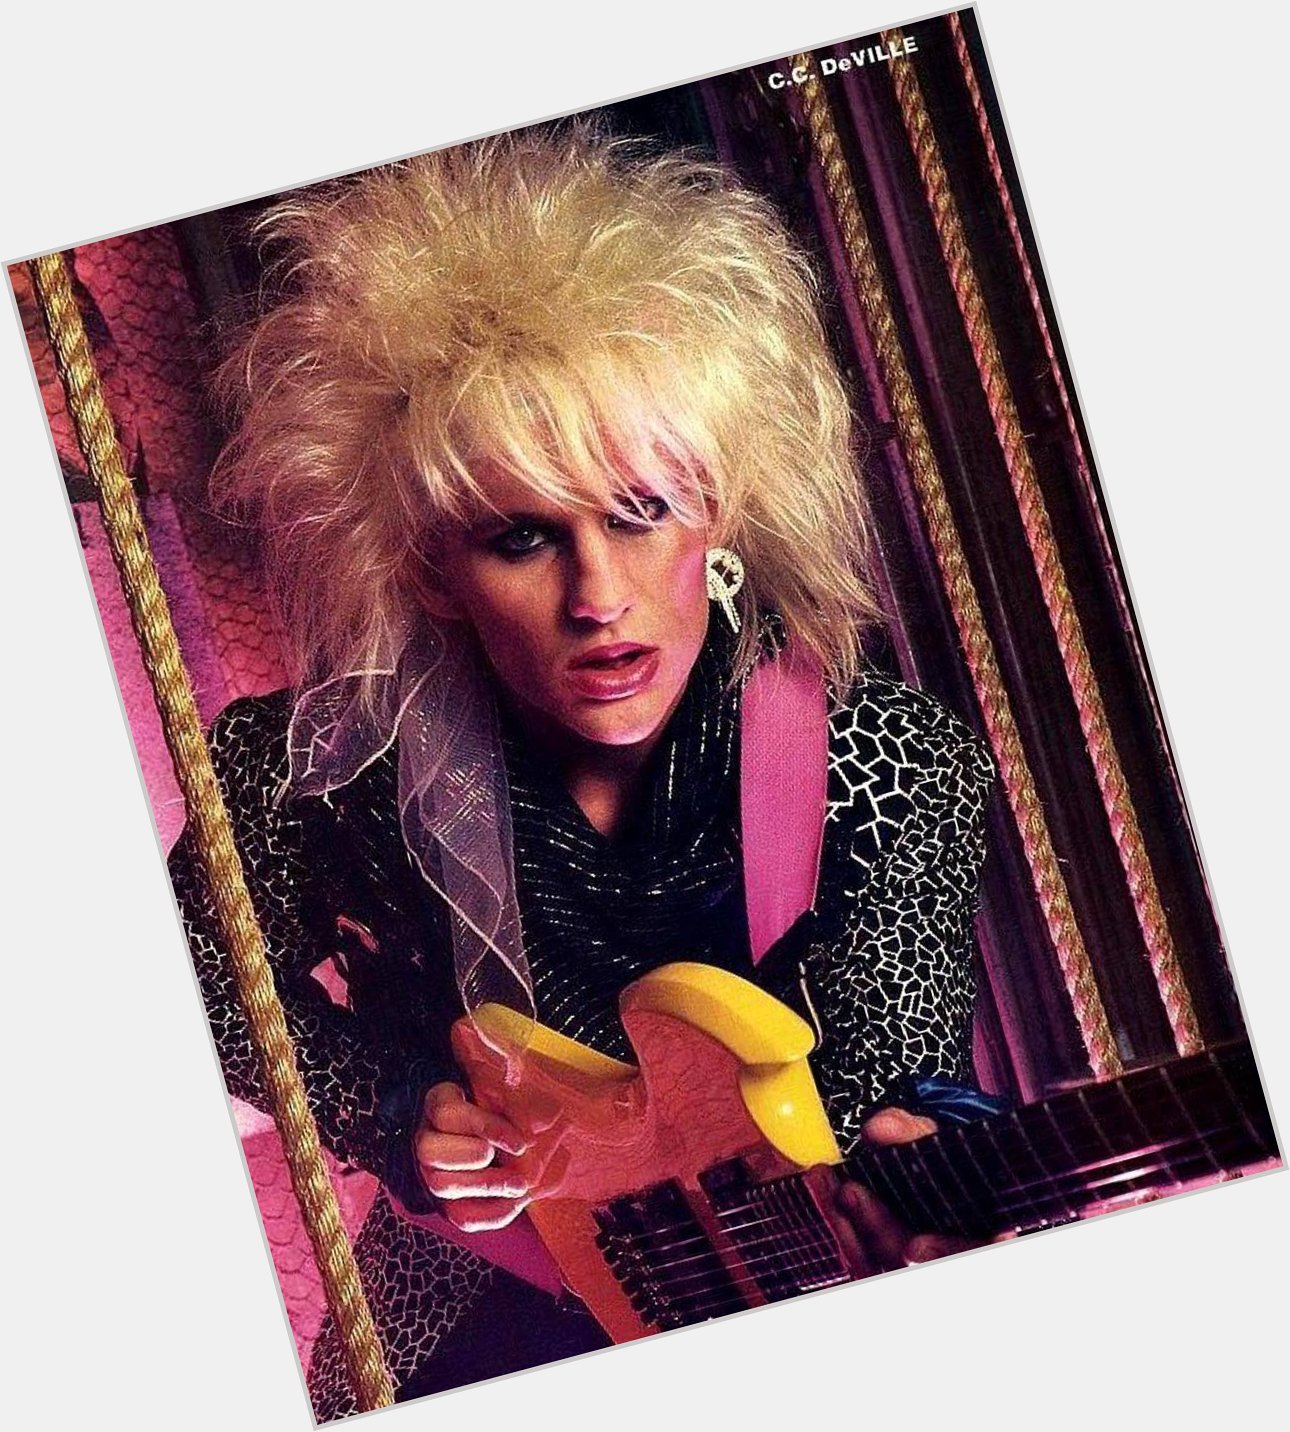 Happy birthday to American guitarist C.C. DeVille, born May 14, 1962, the lead guitarist of the rock band Poison. 